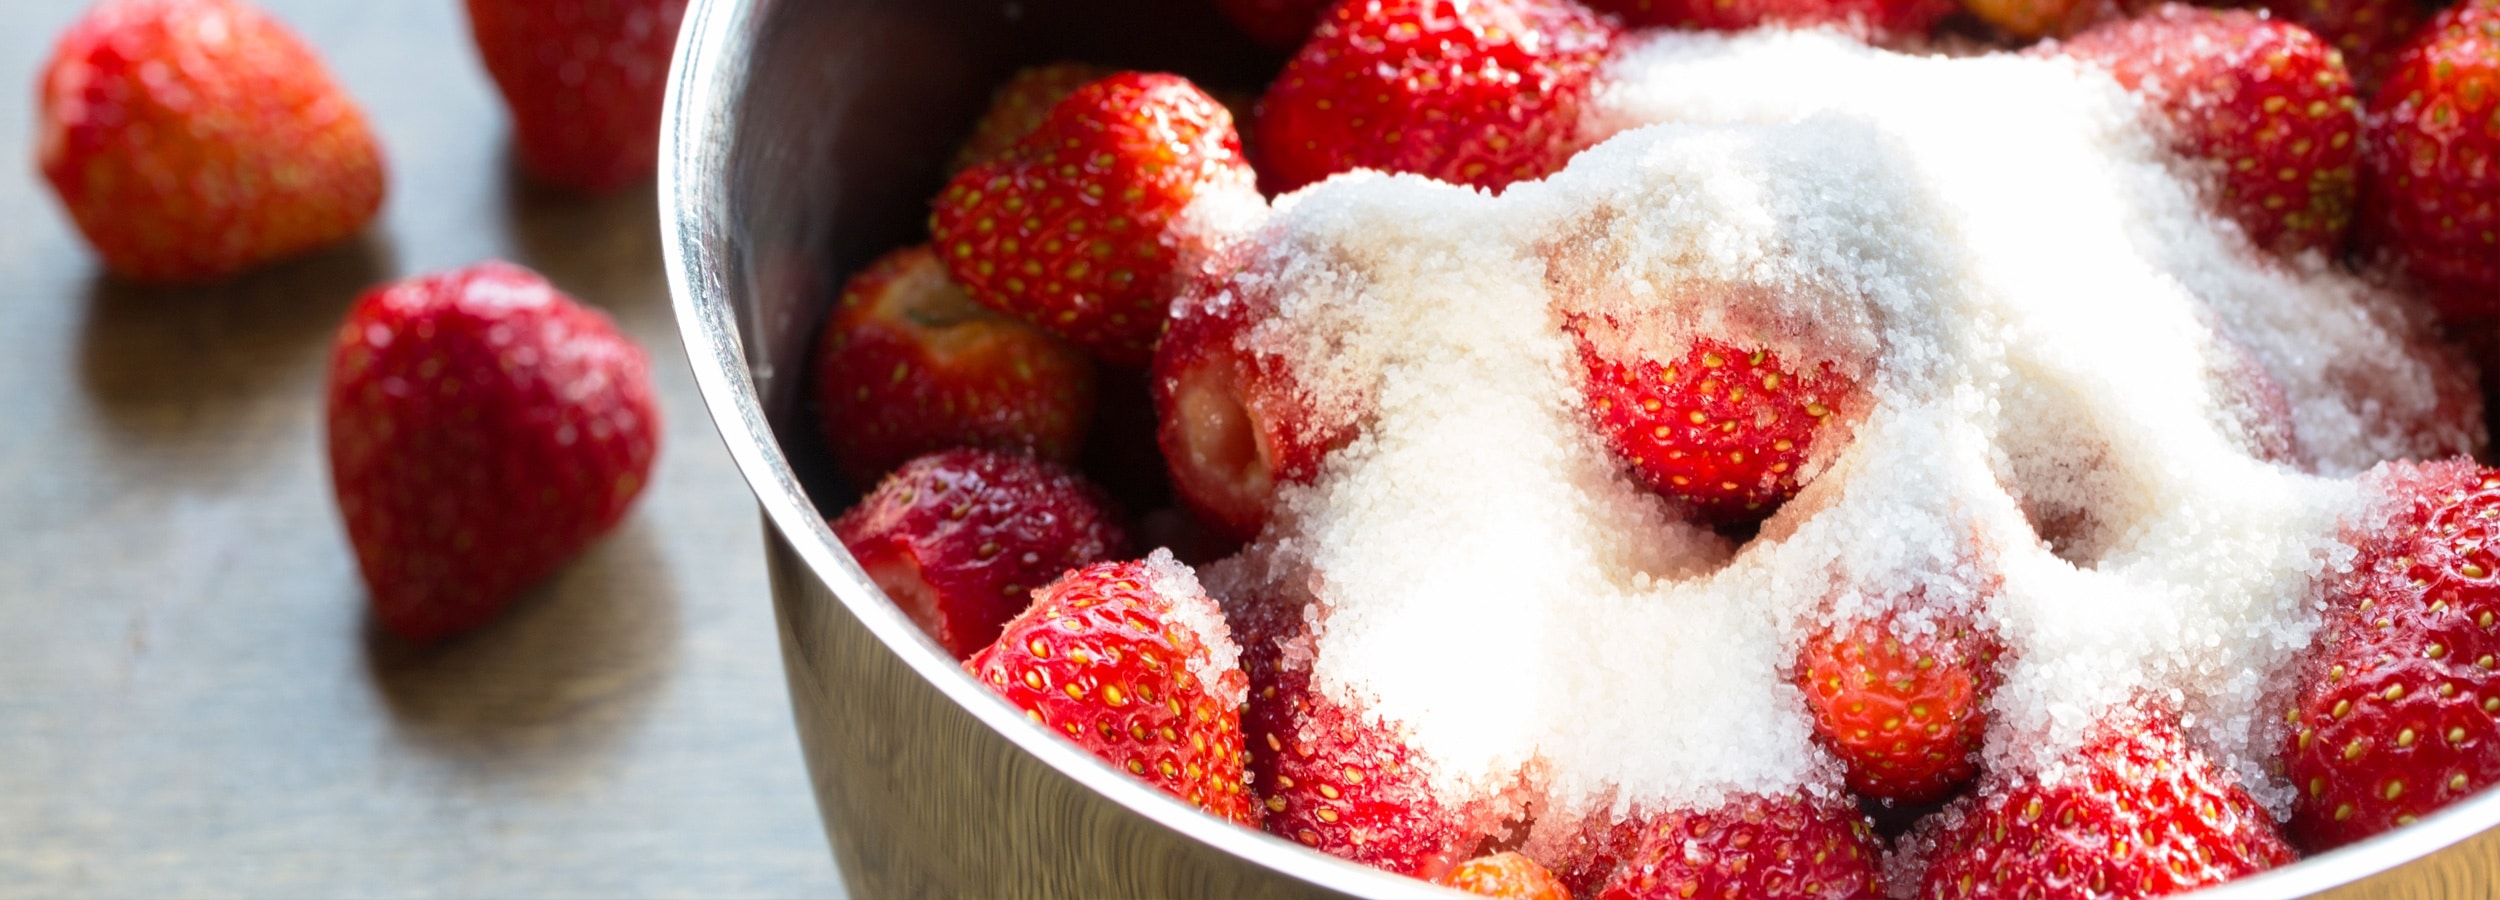 Strawberries in a bowl with sugar